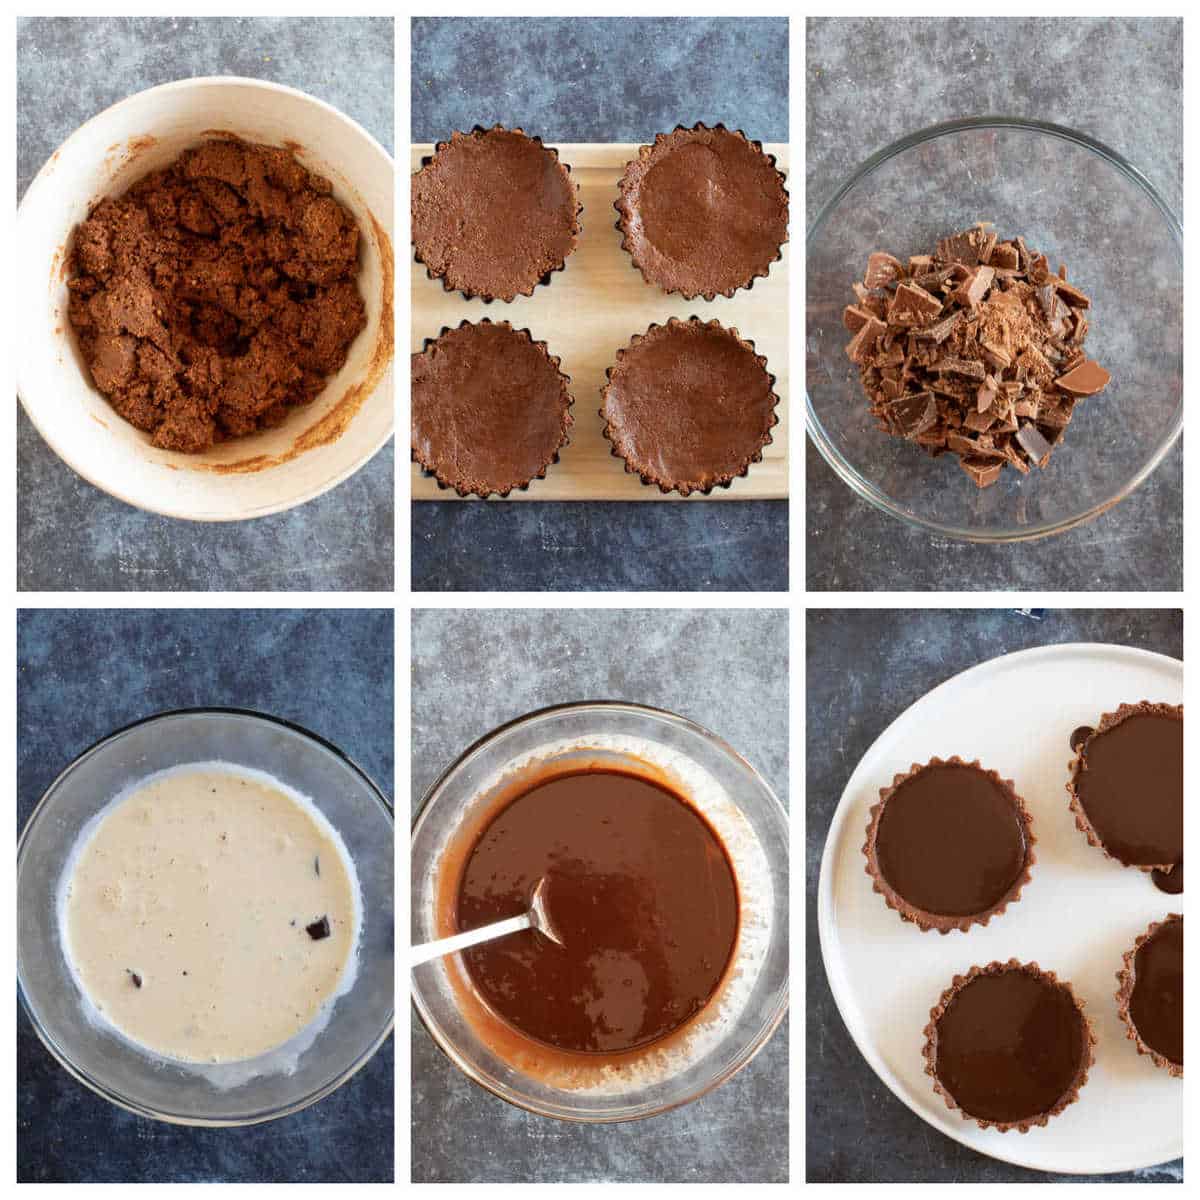 Step by step photo instructions for making the chocolate orange tarts.